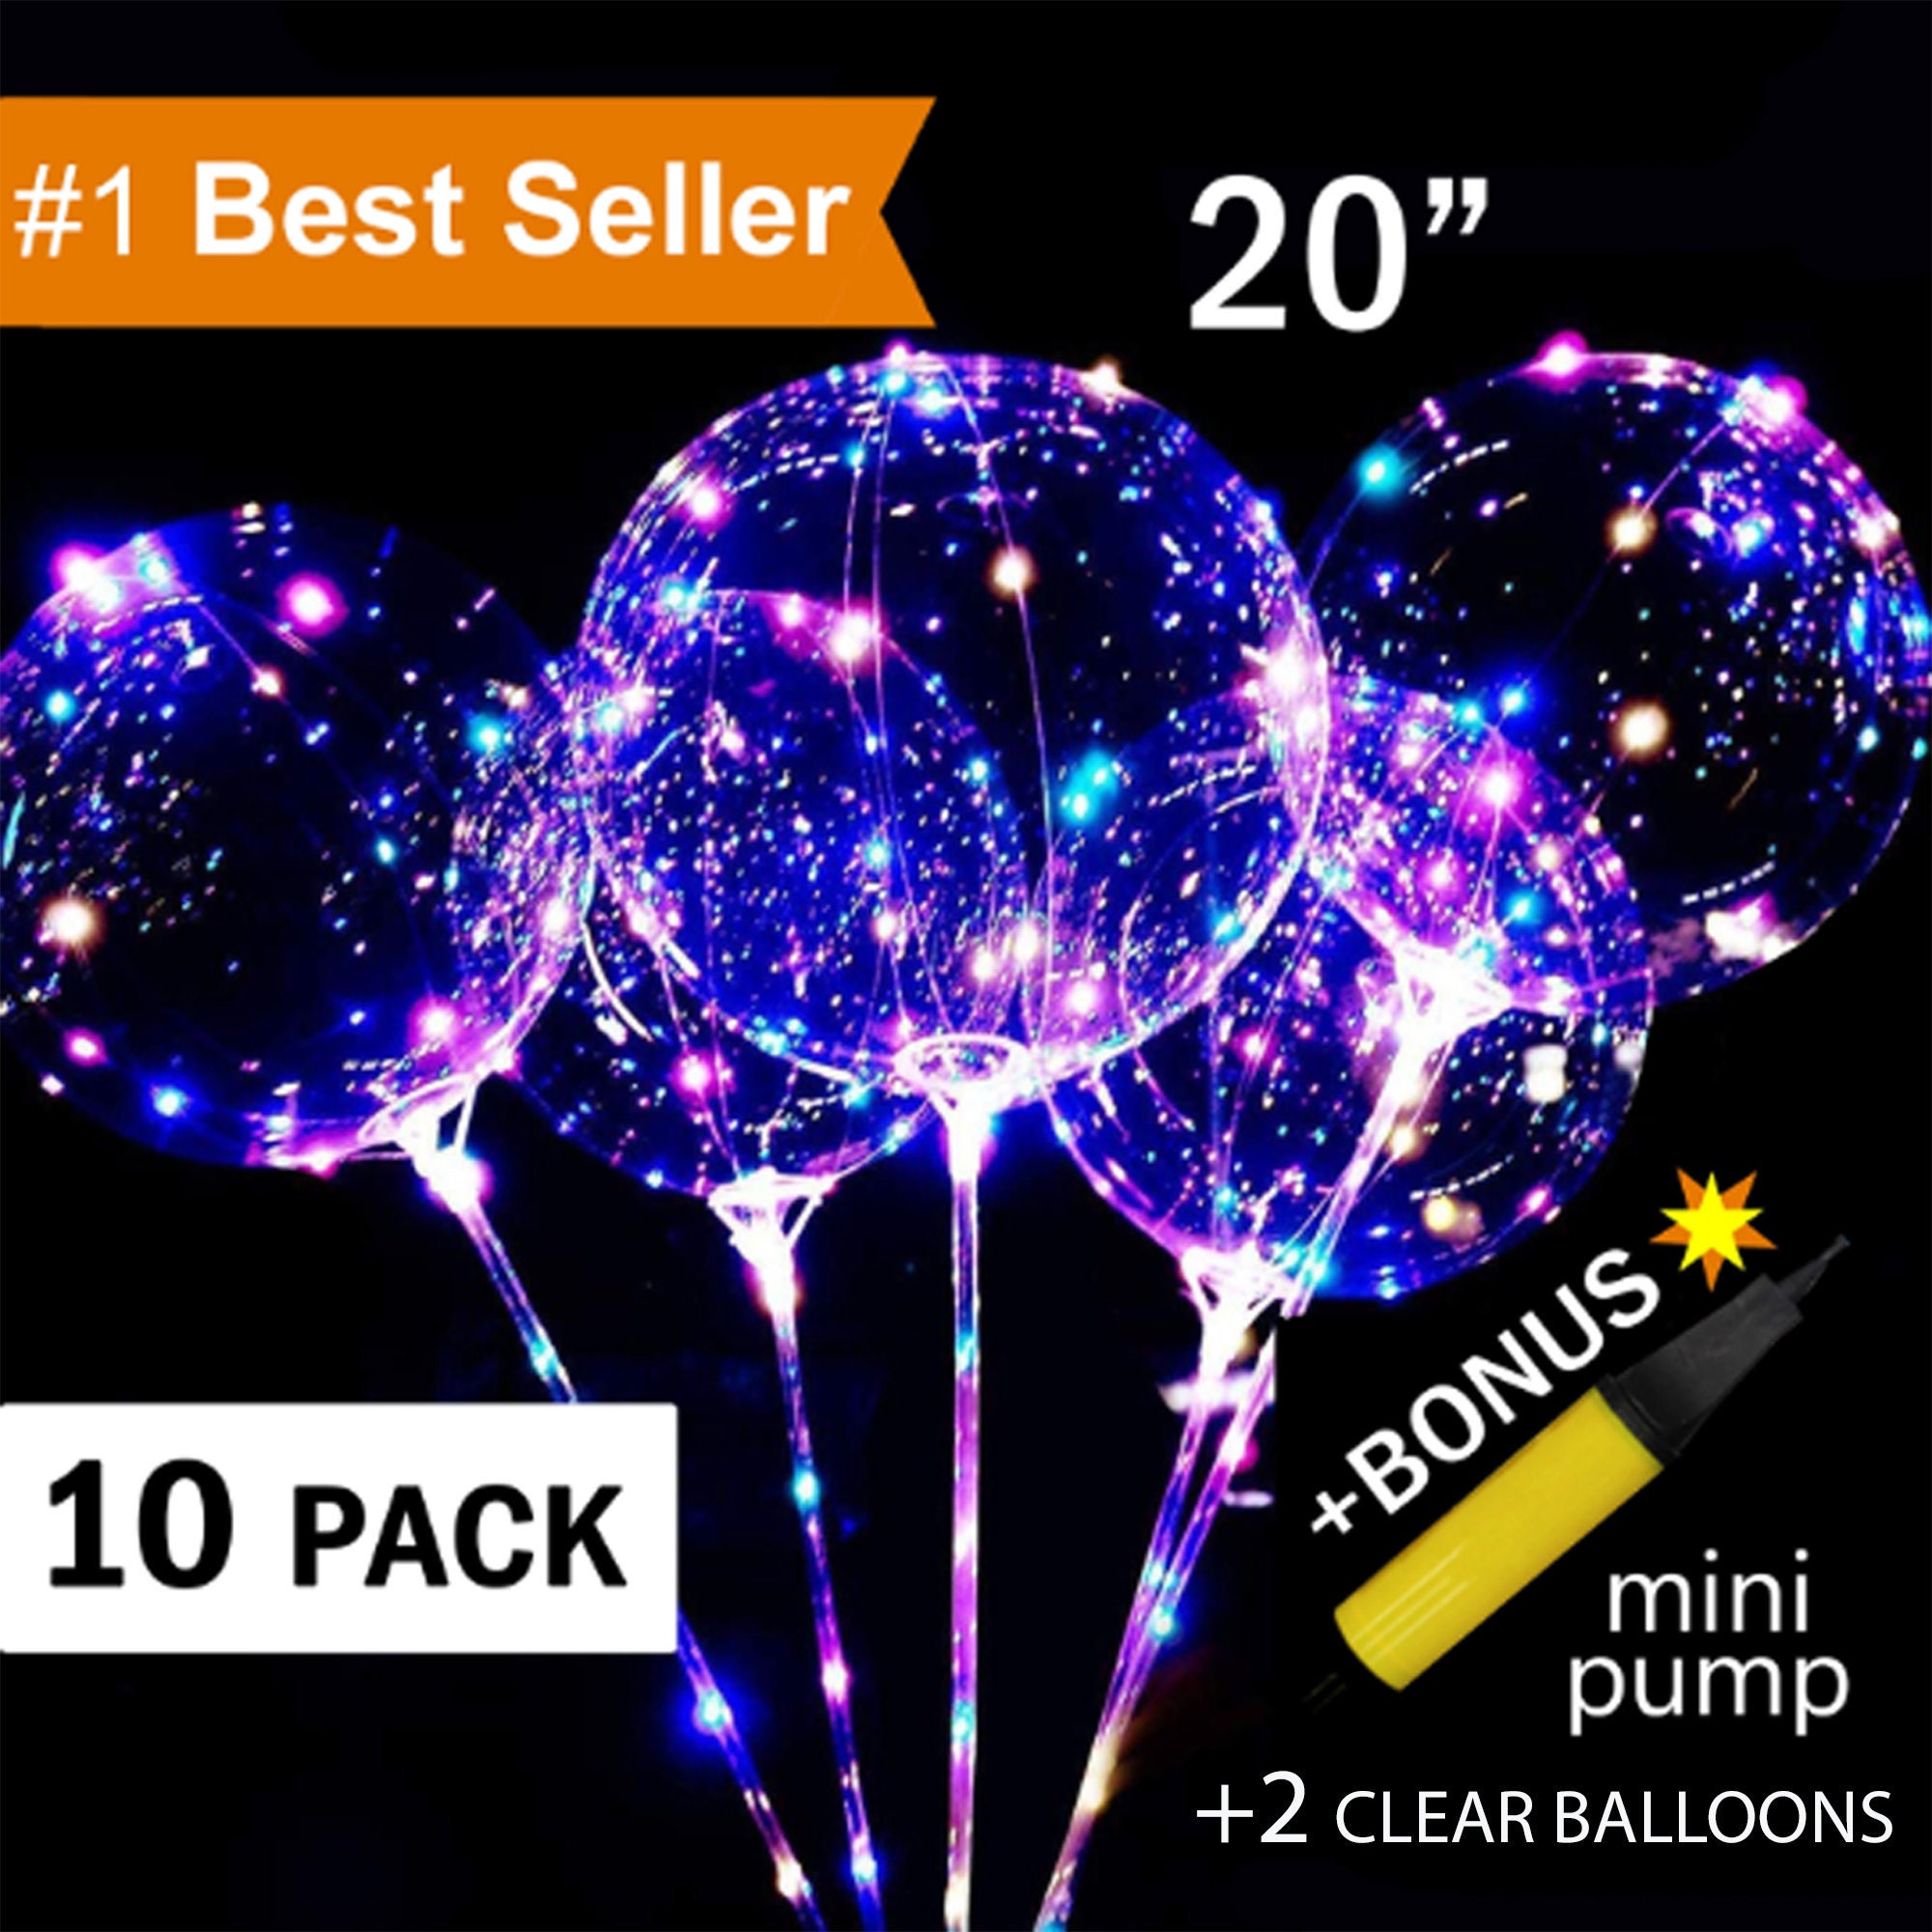  51 Pcs Gold and Black Party Decorations Kit Birthday Balloon  Boxes with Balloons and LED Light Strings Gold and Black Birthday Backdrop  Photo Props for Men Women Birthday Party Supply Balloon